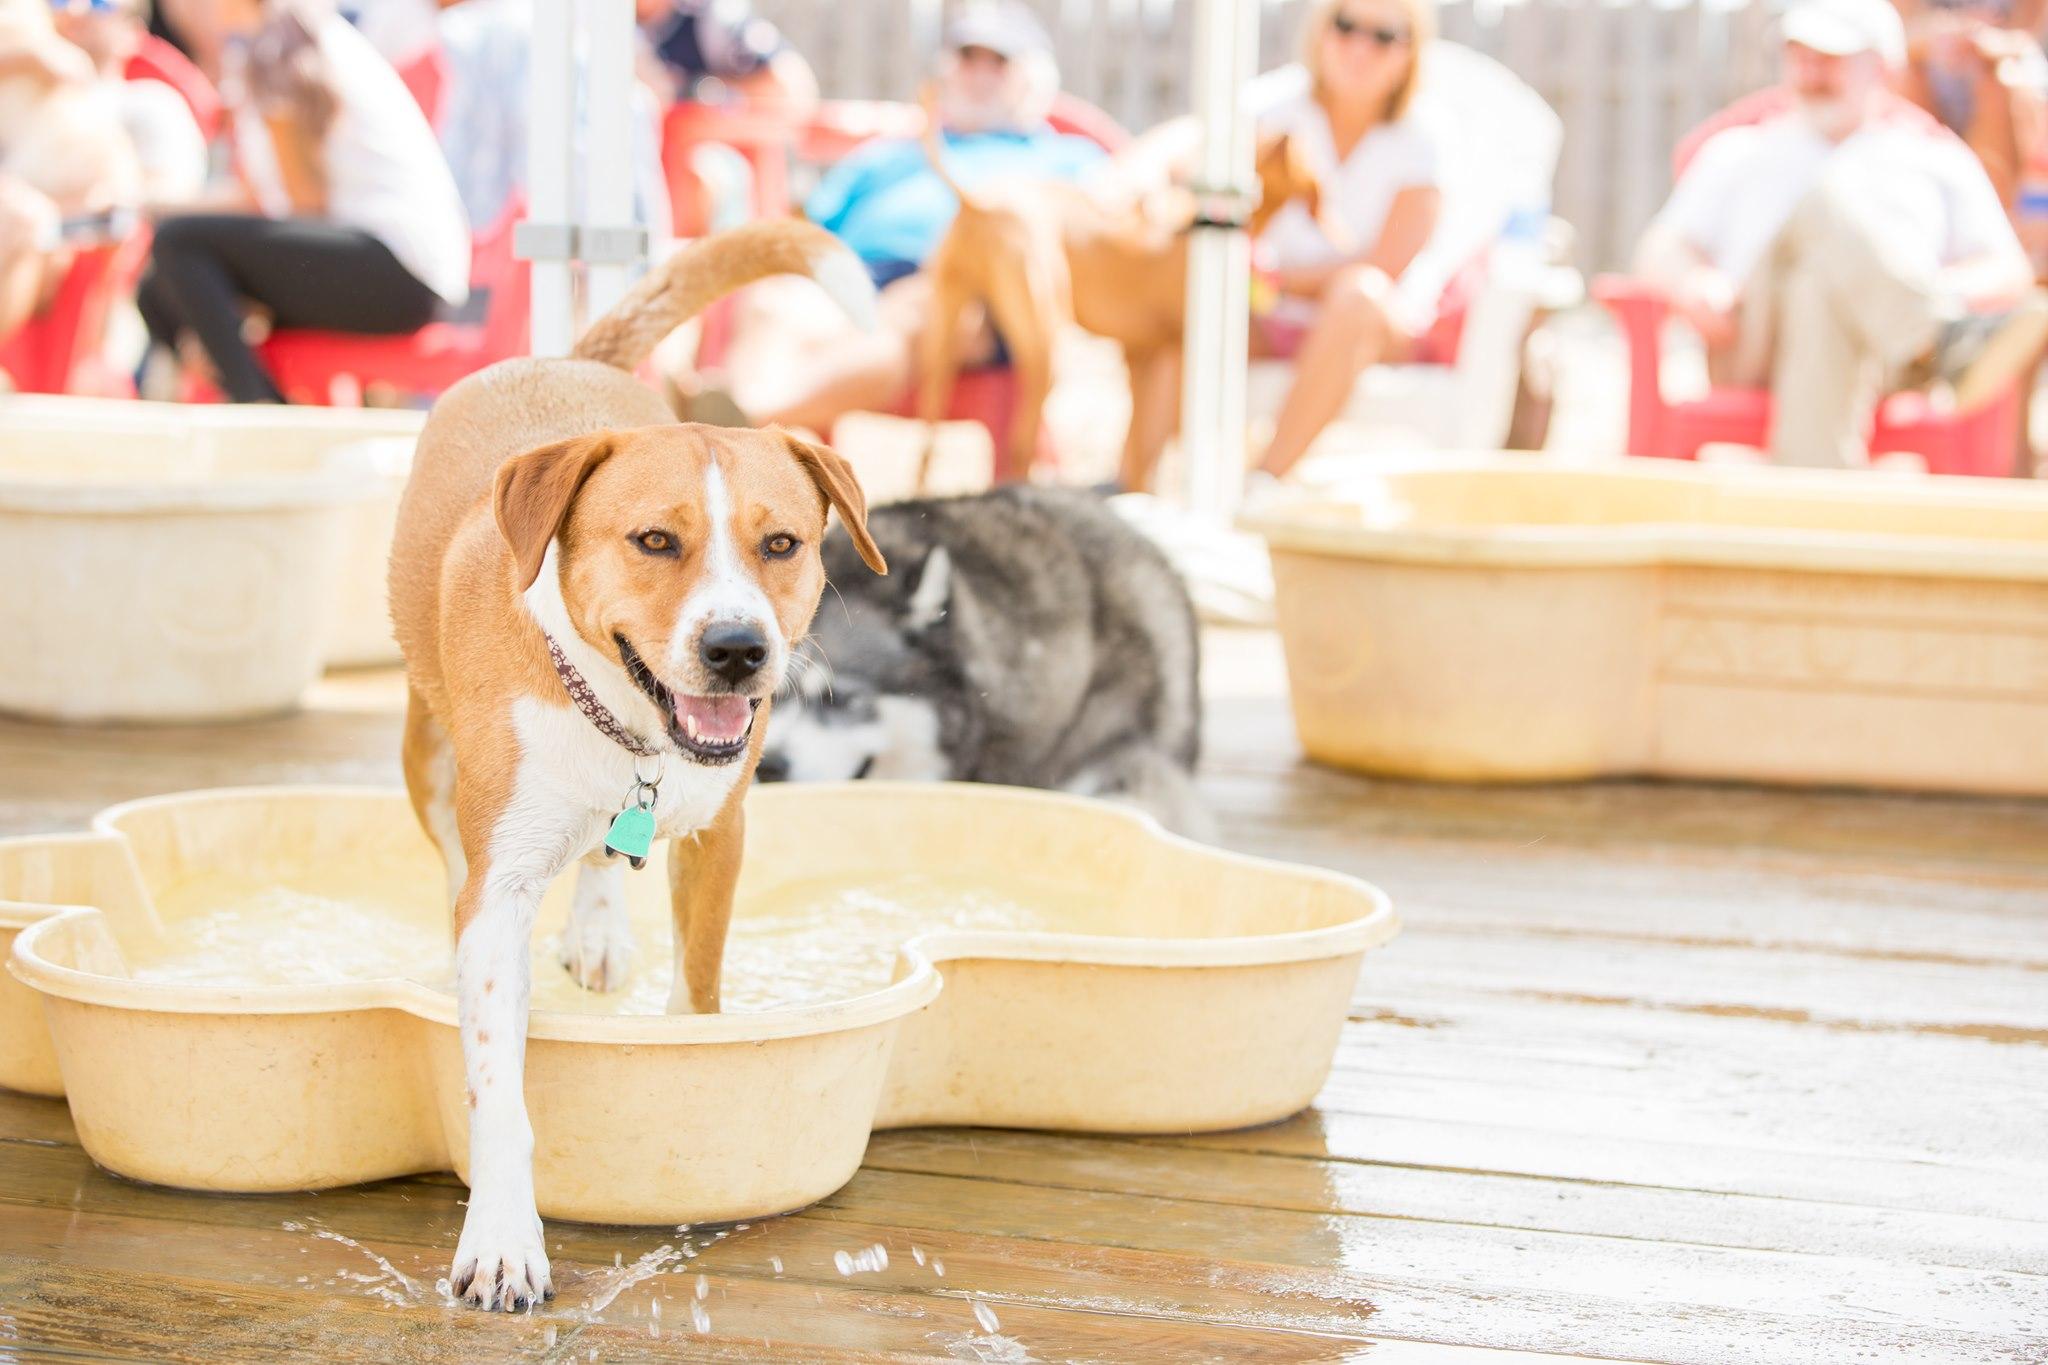 New Jersey beach town bar's 'Yappy Hour' lets dogs unwind with their owners